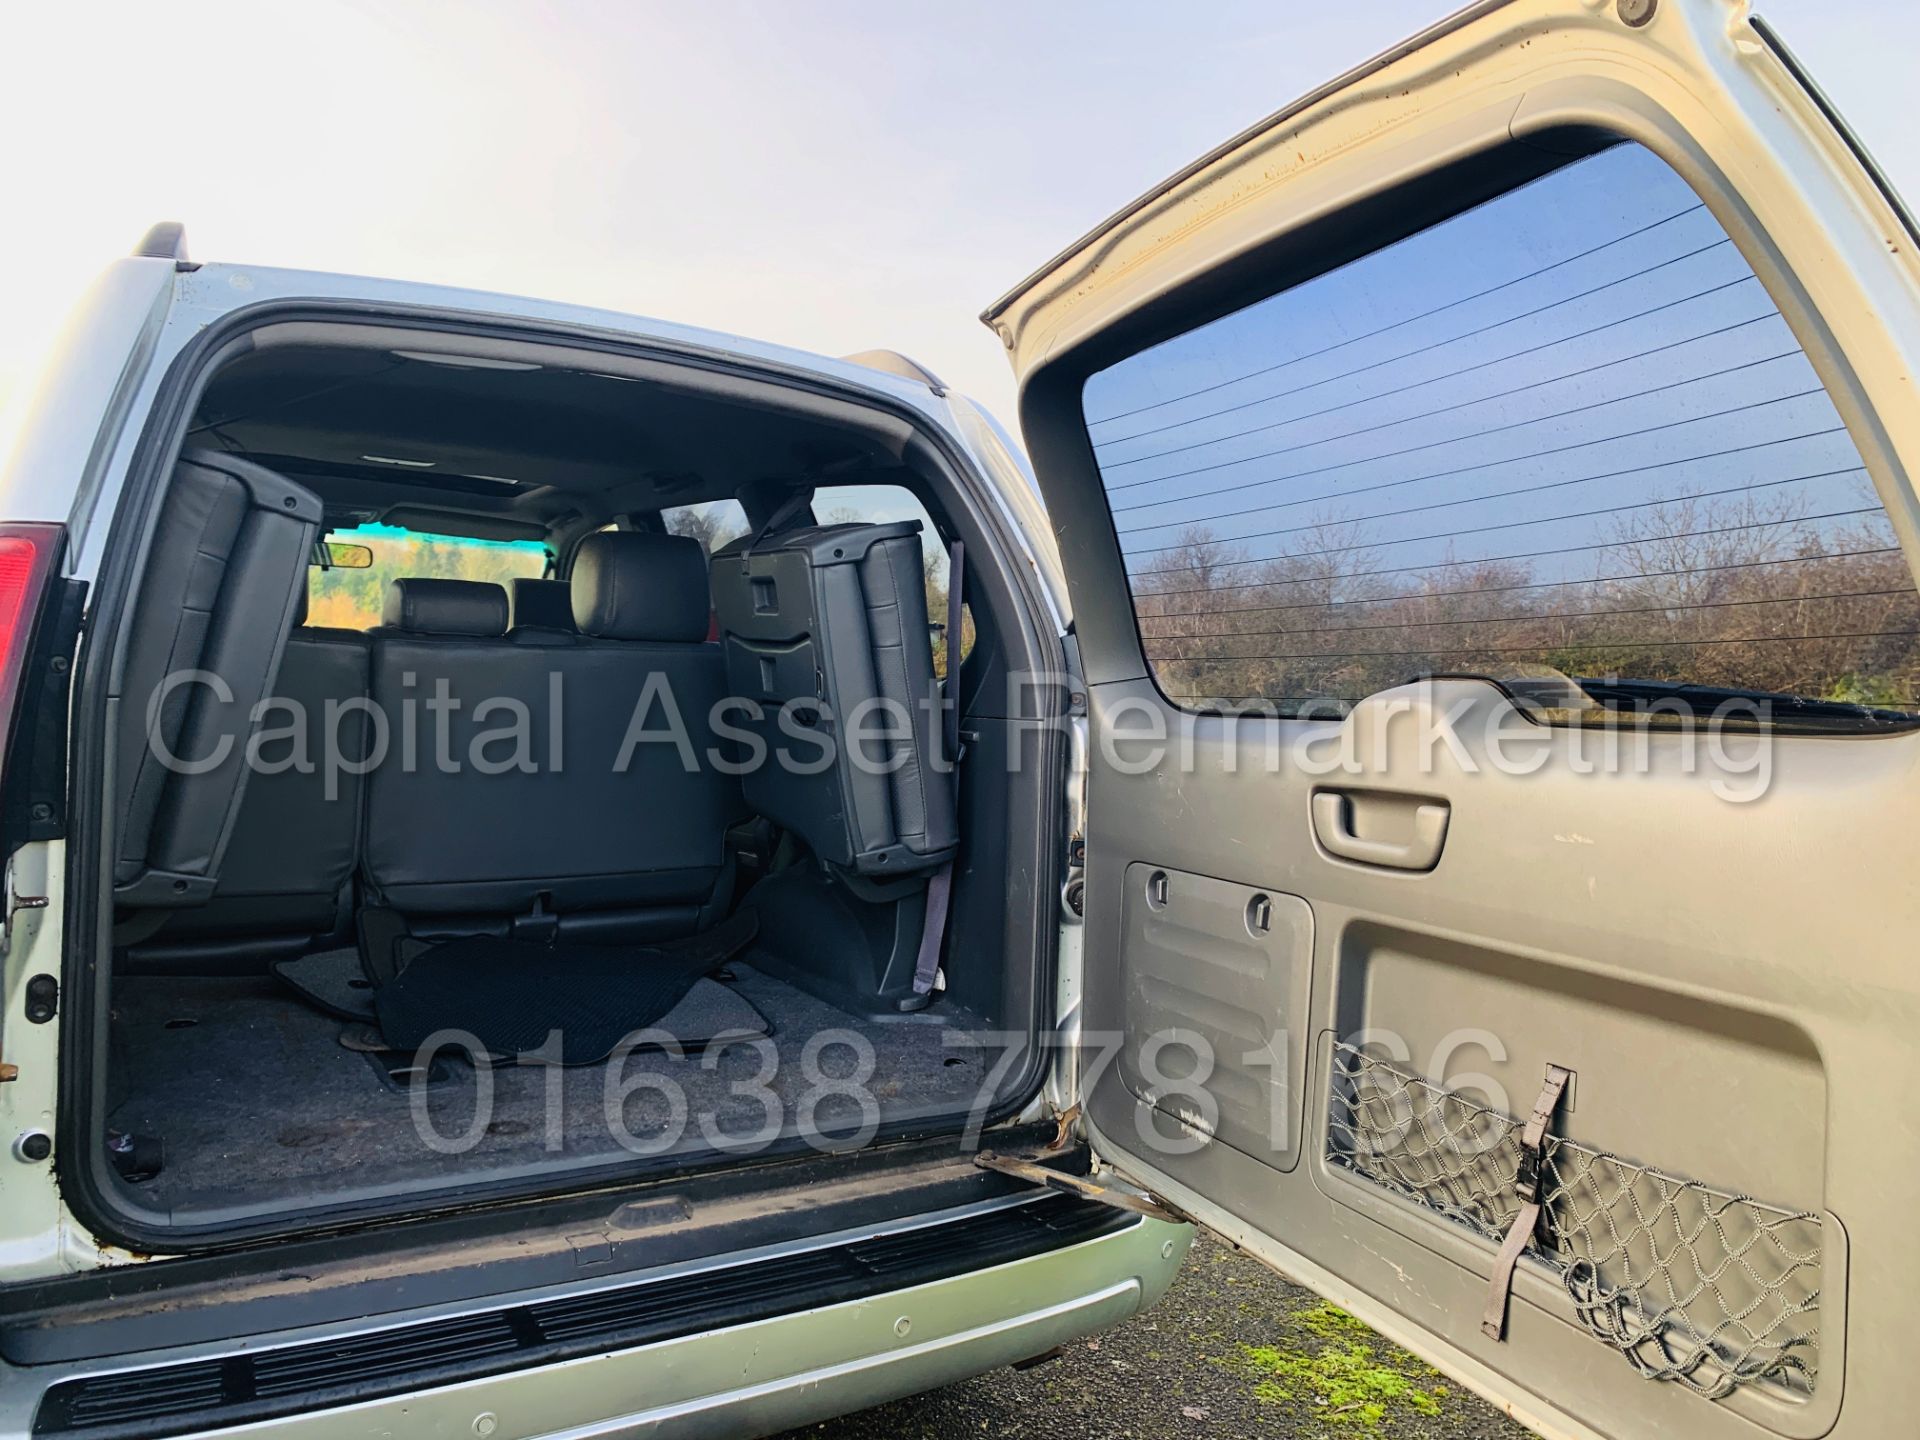 (On Sale) TOYOTA LAND CRUISER *INVINCIBLE* 7 SEATER SUV (2006) '3.0 D-4D - AUTO' *TOP SPEC* (NO VAT) - Image 24 of 50